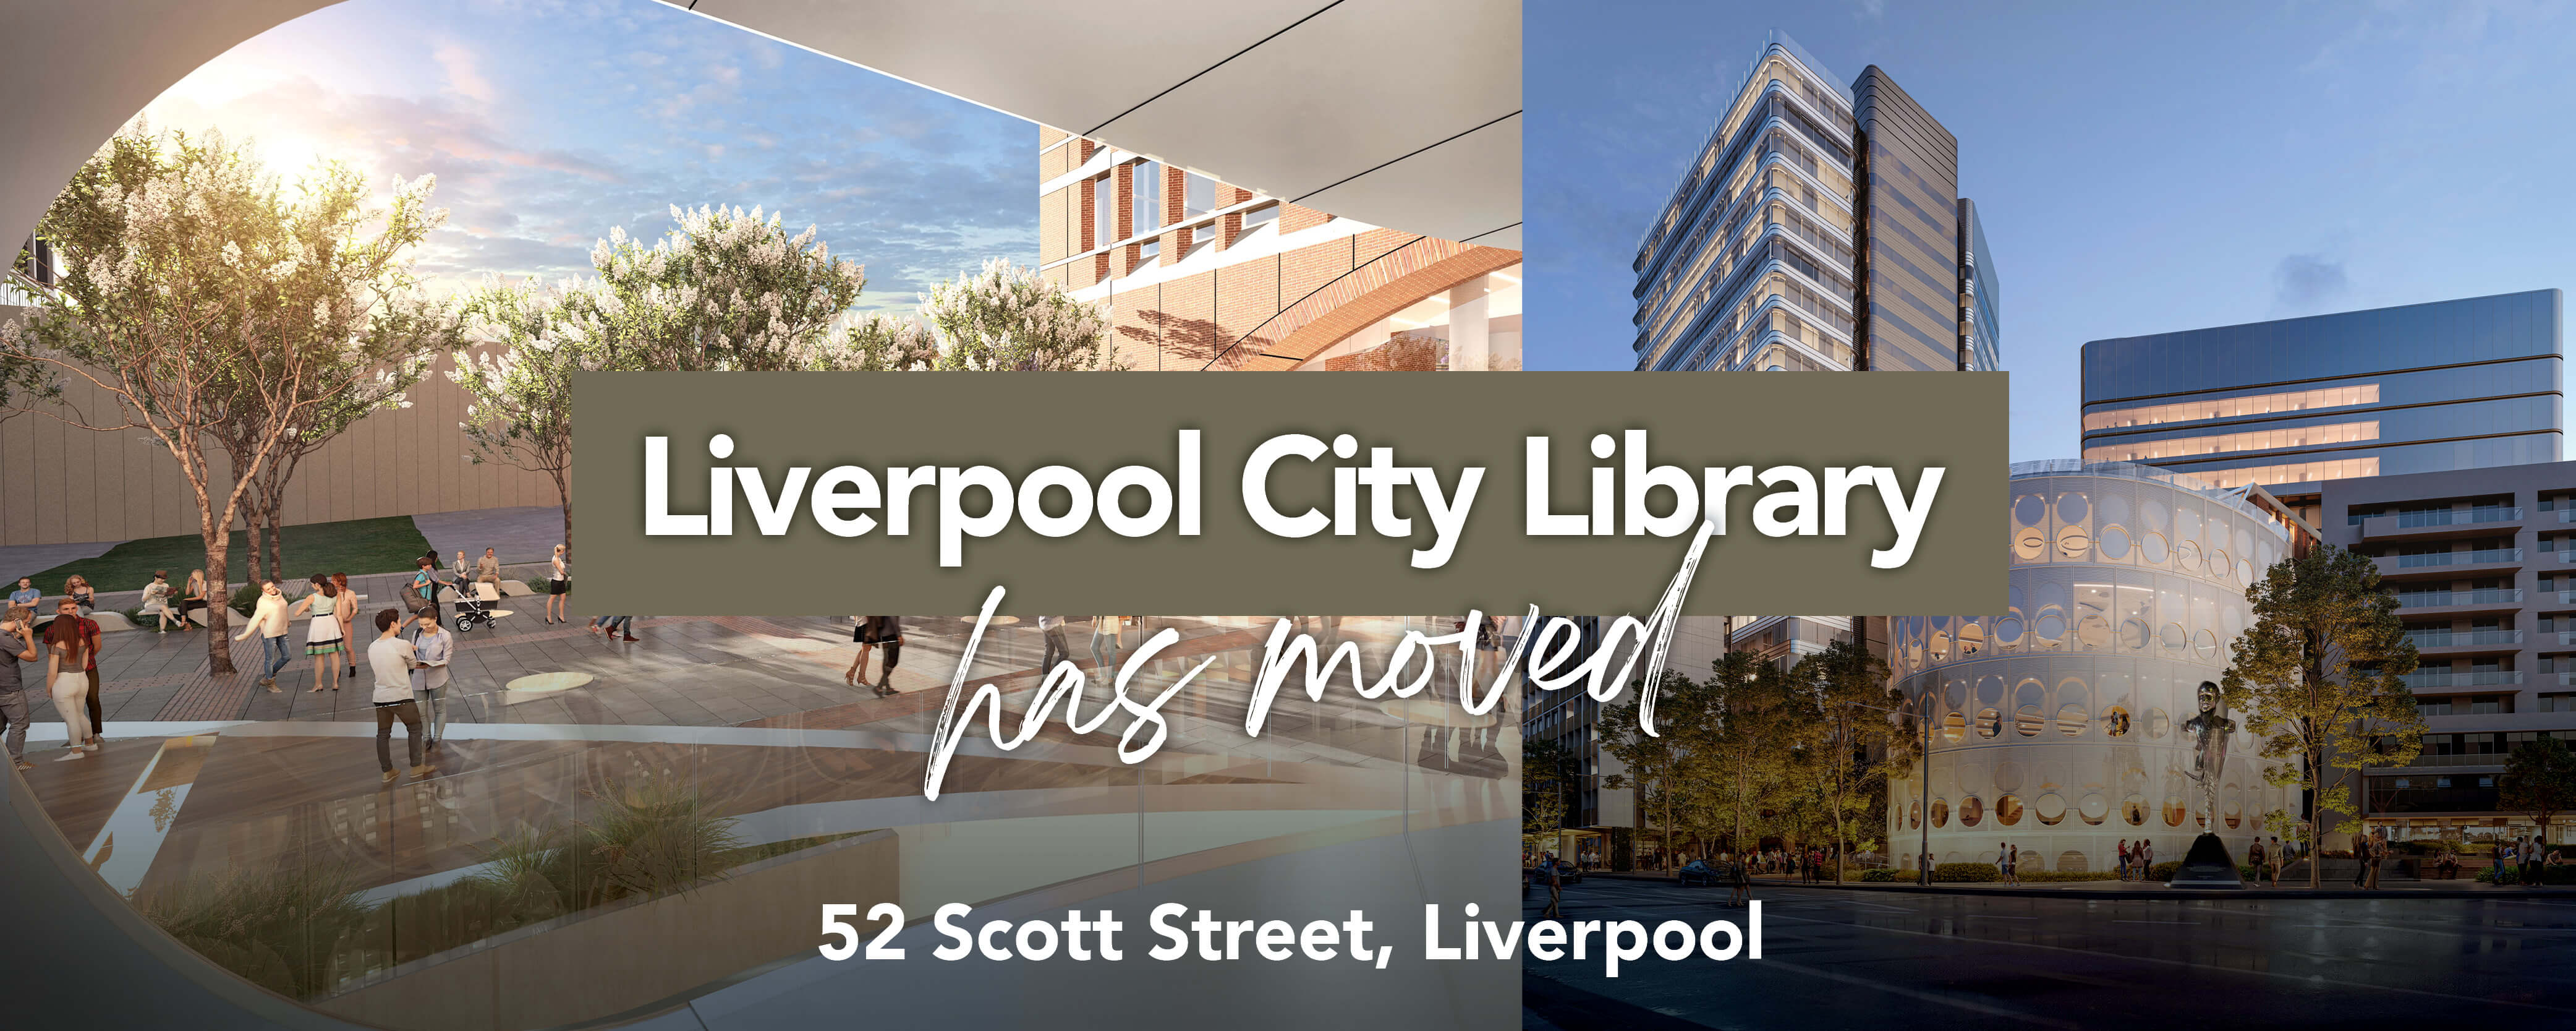 Liverpool City Library Moving